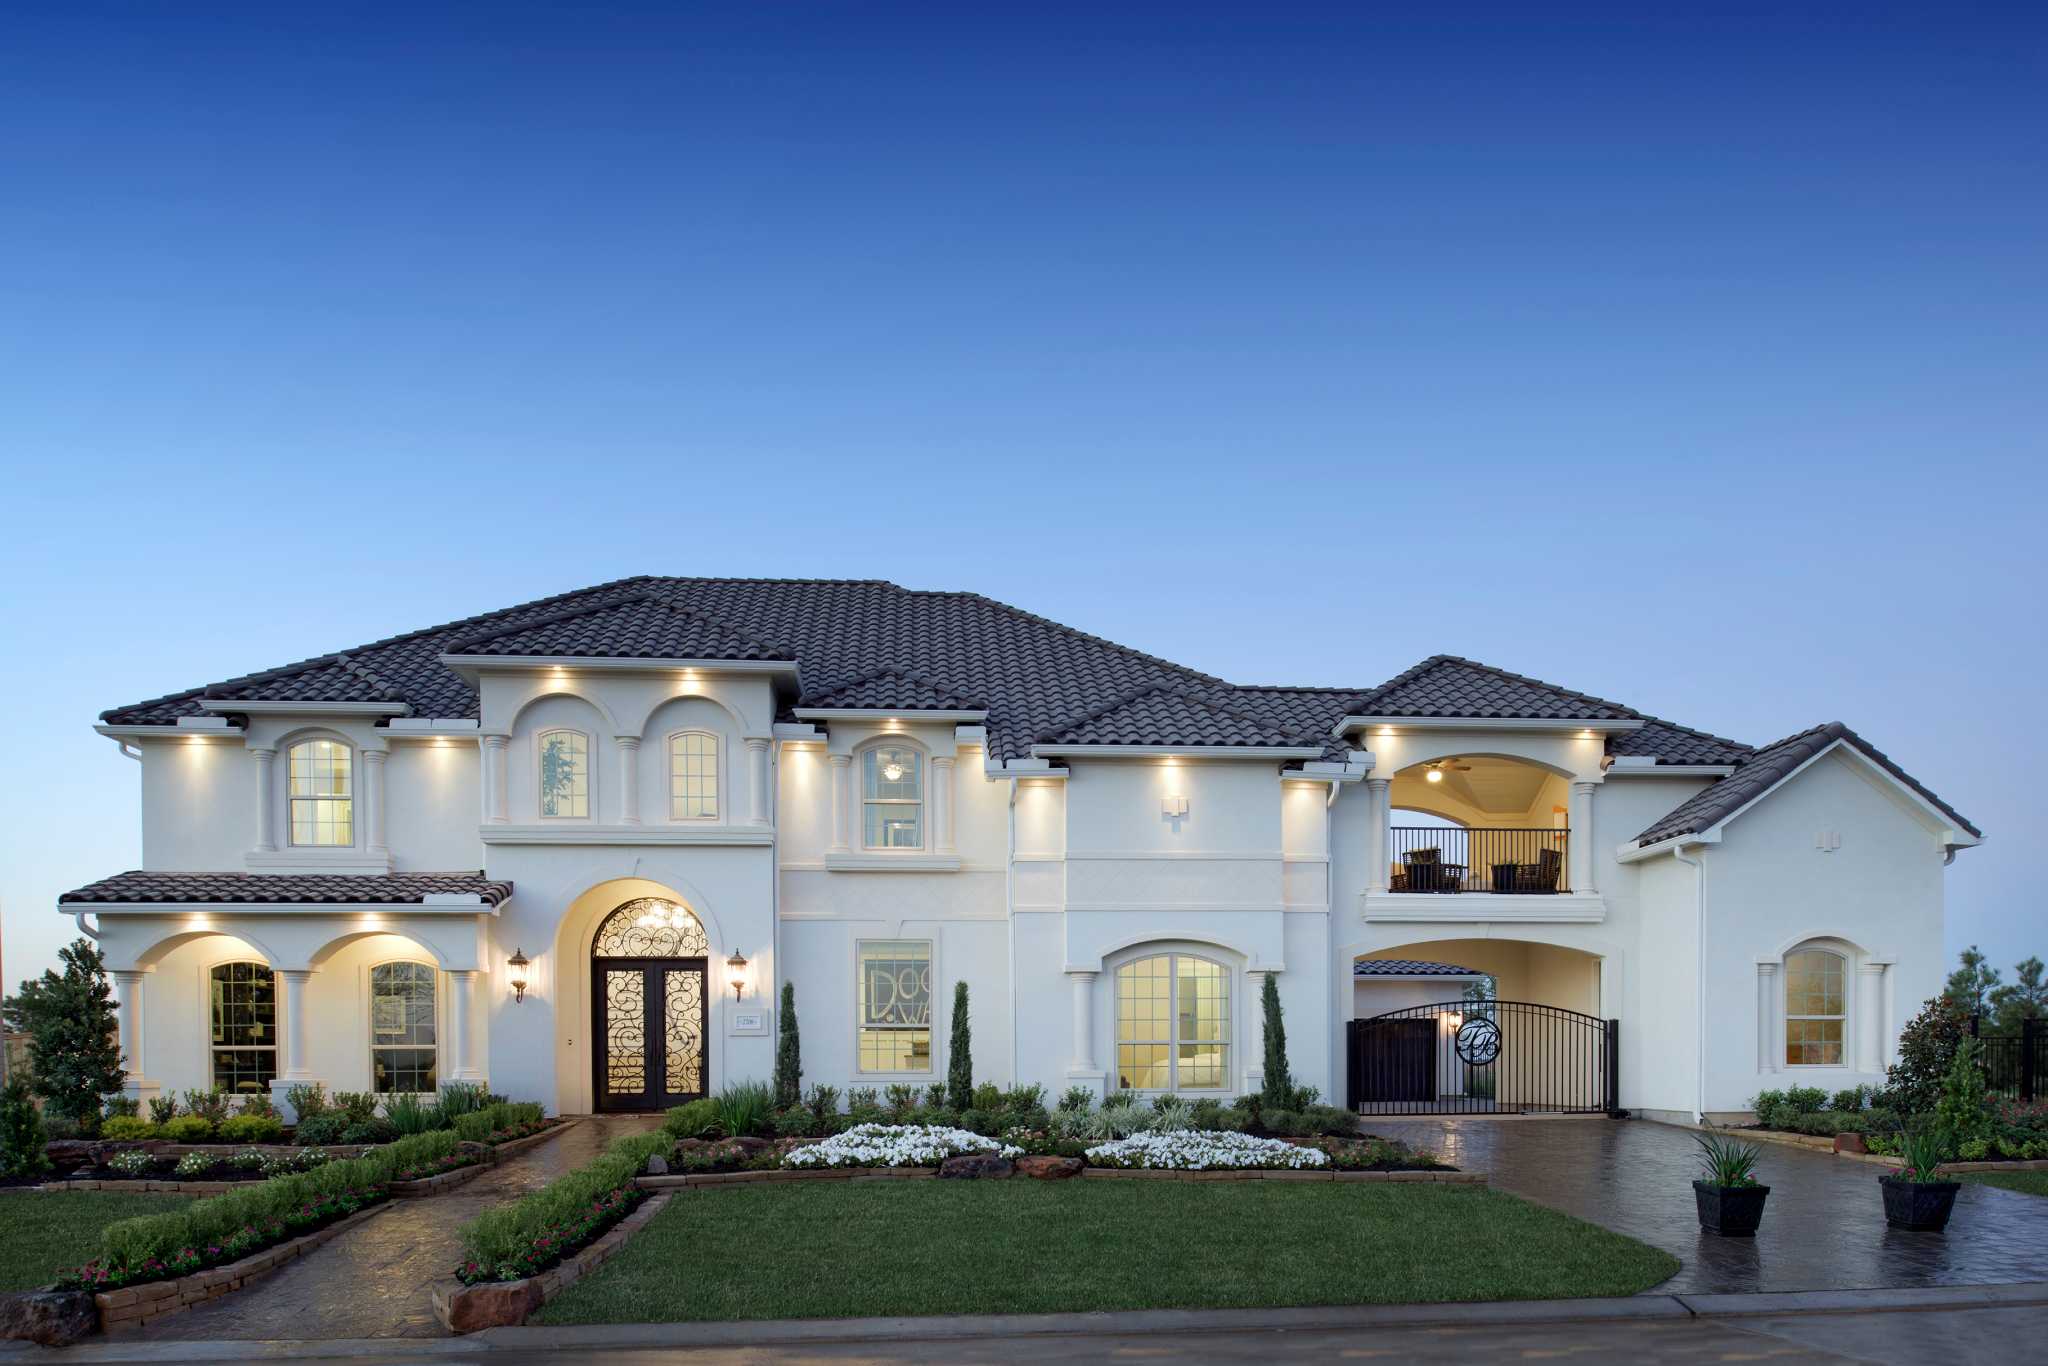 Builder's National Sales Event offers limited-time savings, incentives - Houston Chronicle